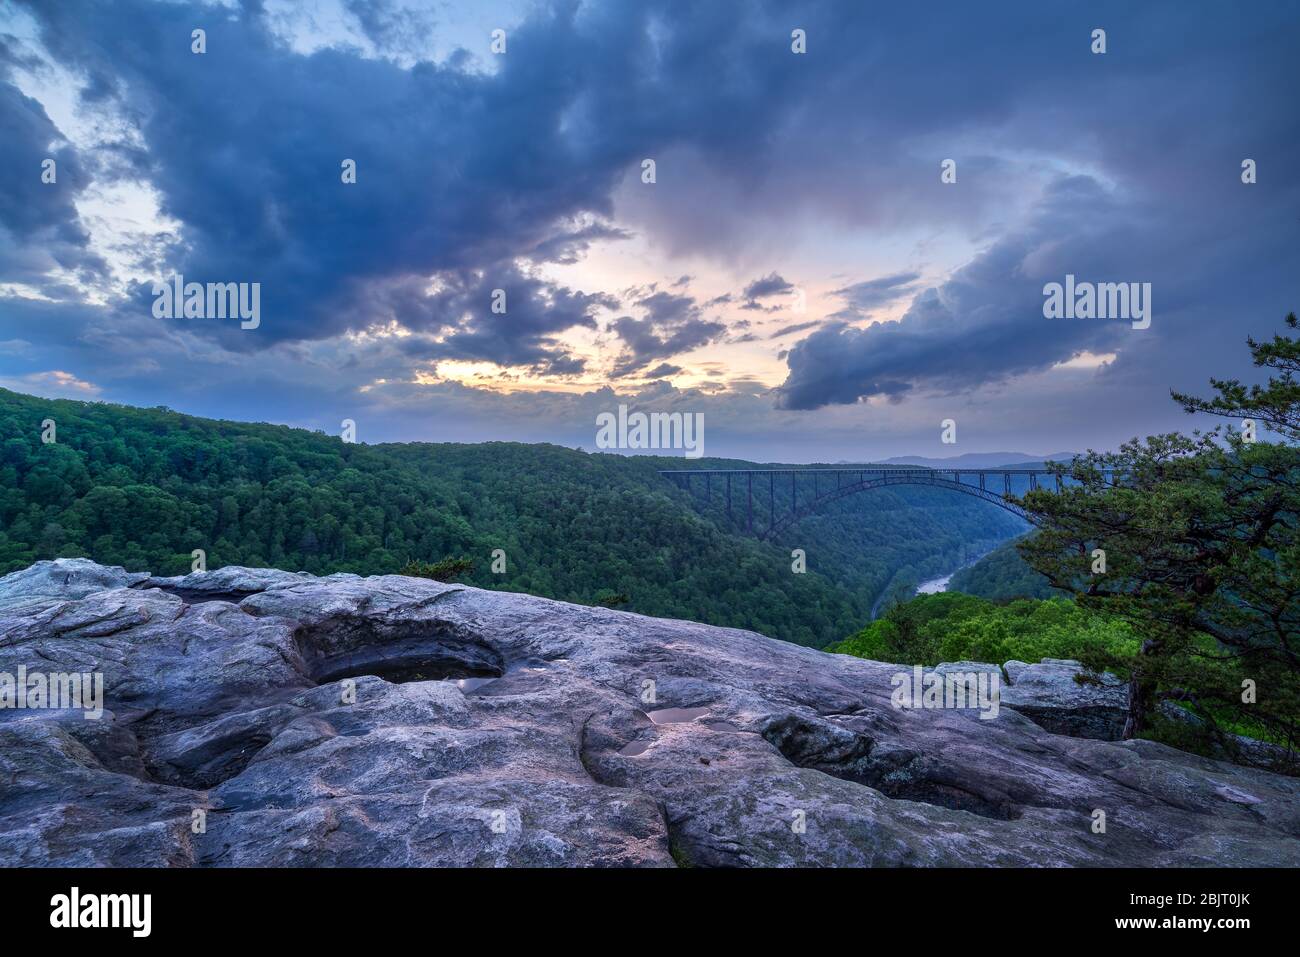 Spring storms sweep over the New River Gorge of West Virginia leaving dramatic, moody sunset skies as viewed from the Long Point overlook. Stock Photo